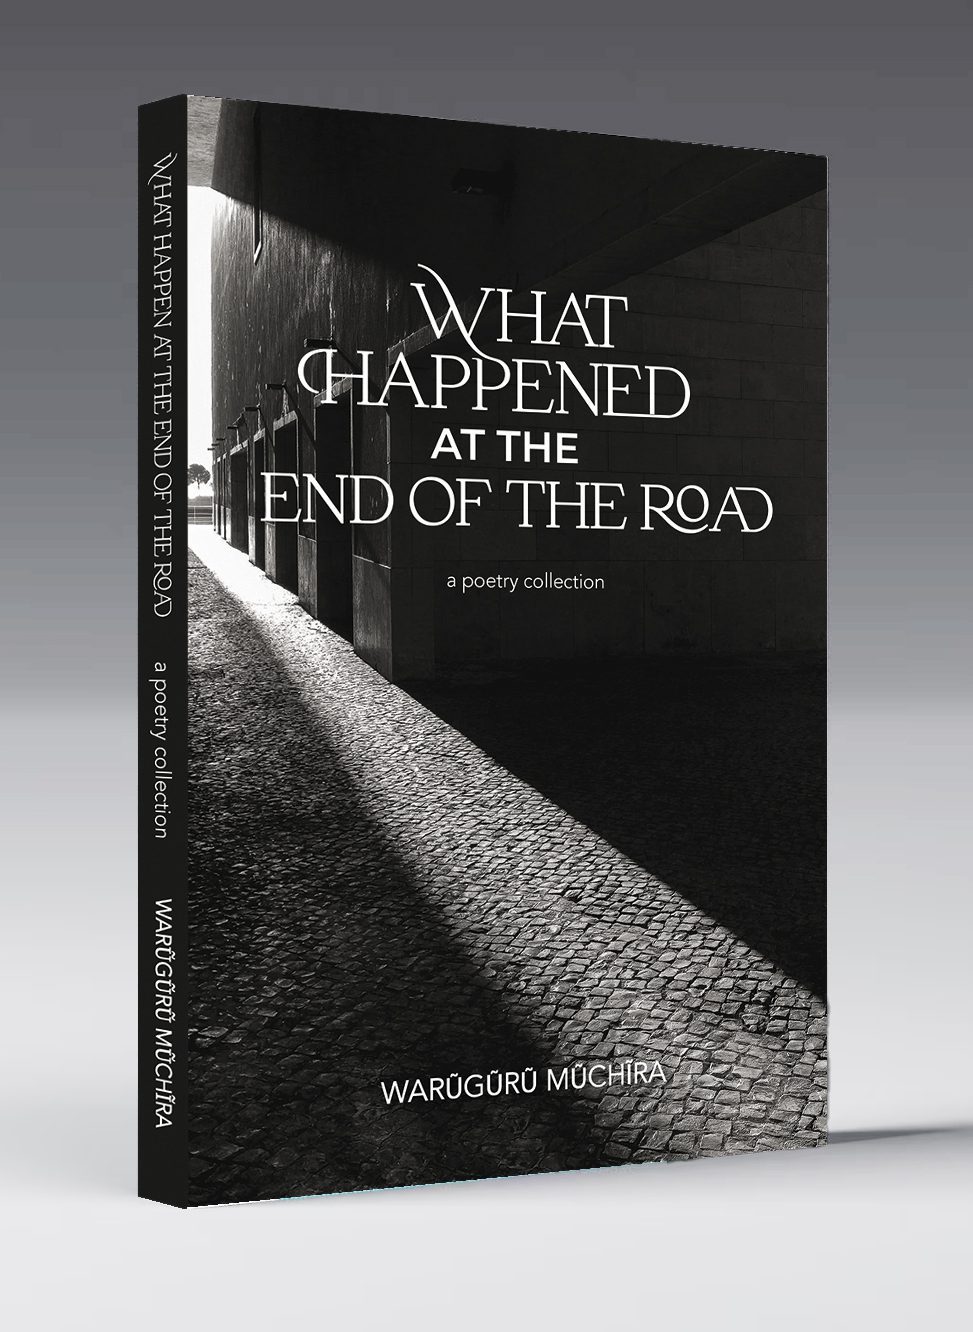 What Happened cover 3d